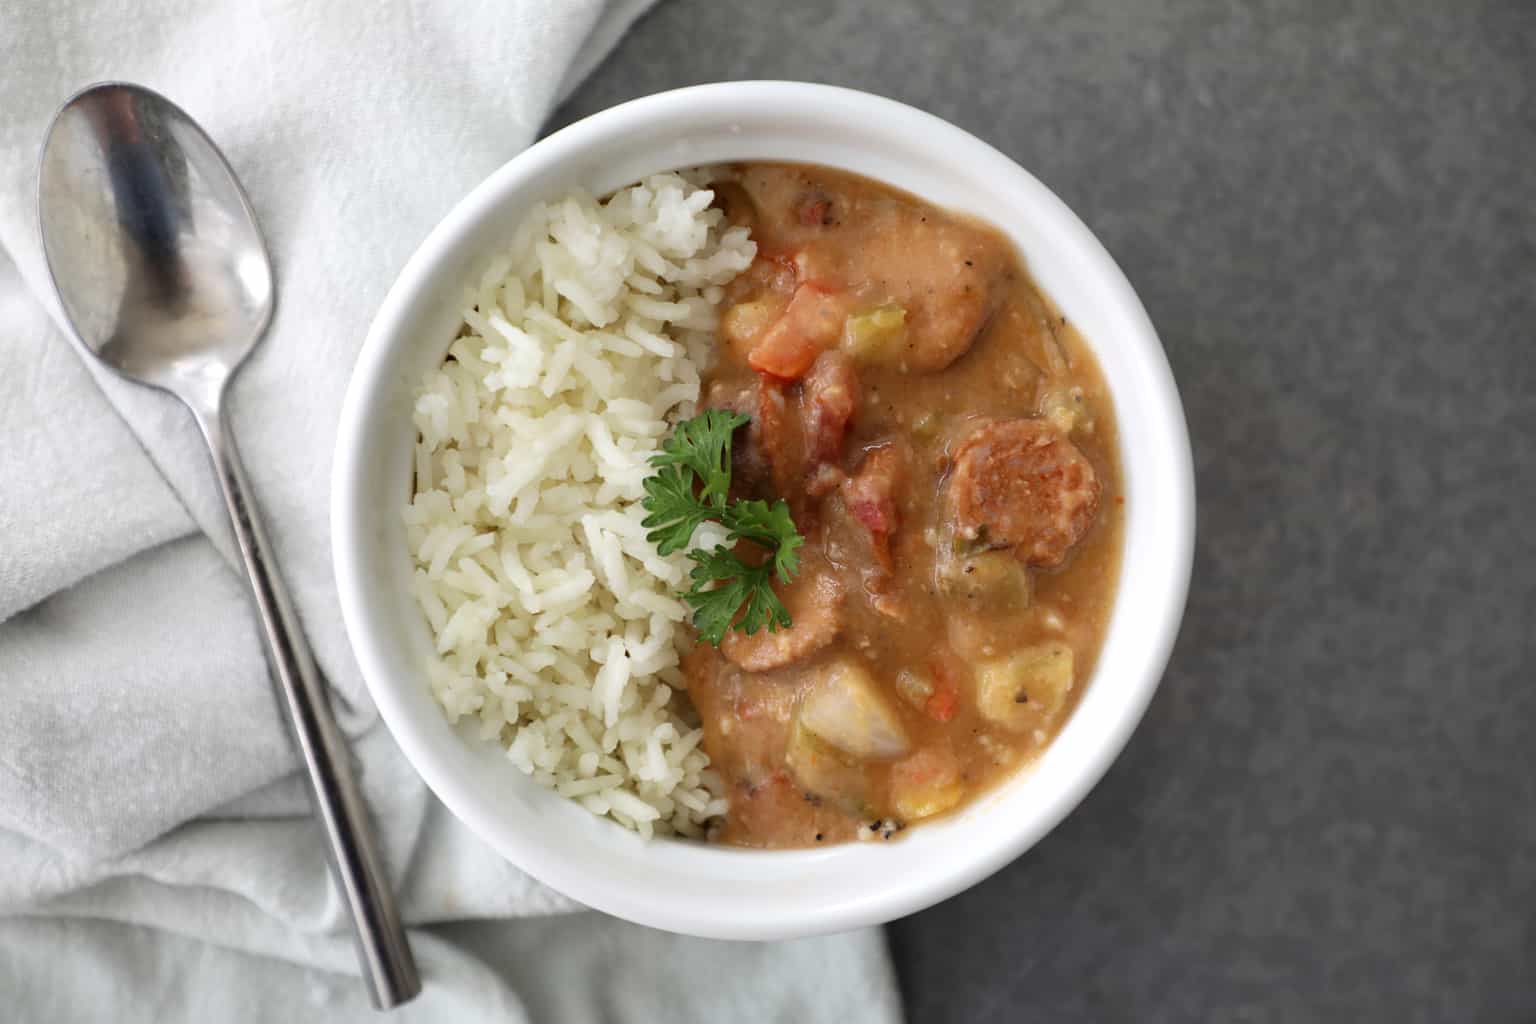 gumbo and rice garnished with fresh parsley on a concrete counter with a spoon